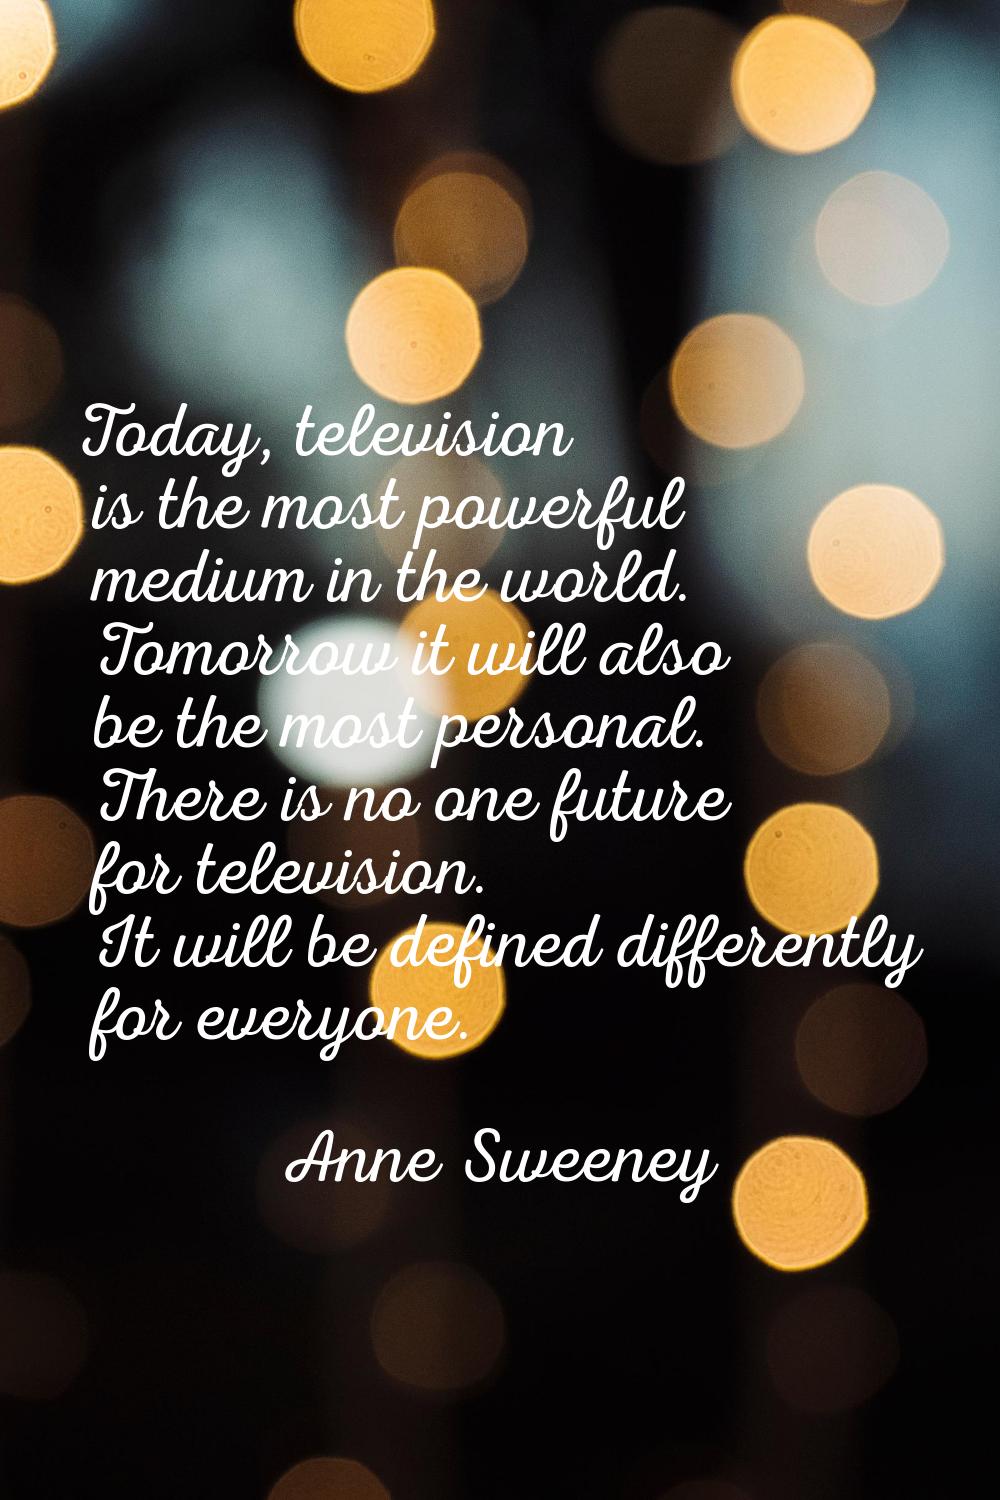 Today, television is the most powerful medium in the world. Tomorrow it will also be the most perso